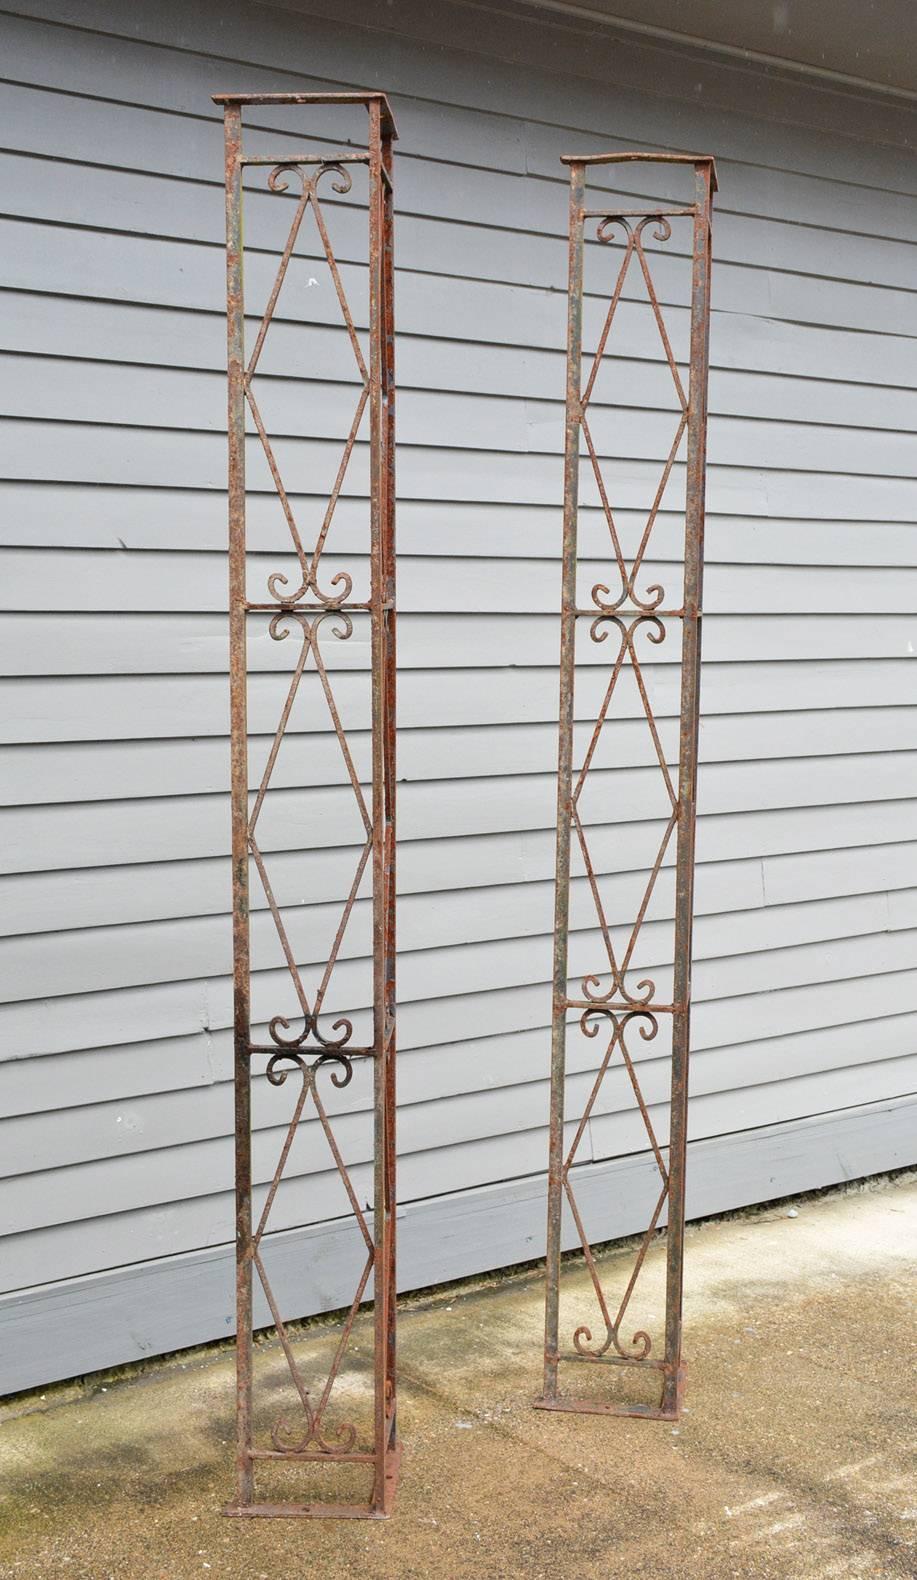 The pair of antique neoclassical wrought iron porch posts or porch supports define corners of the space, as well as act as supporting elements. Holes top and bottom for screws secure the brackets to the floor and ceiling.
They would also work well